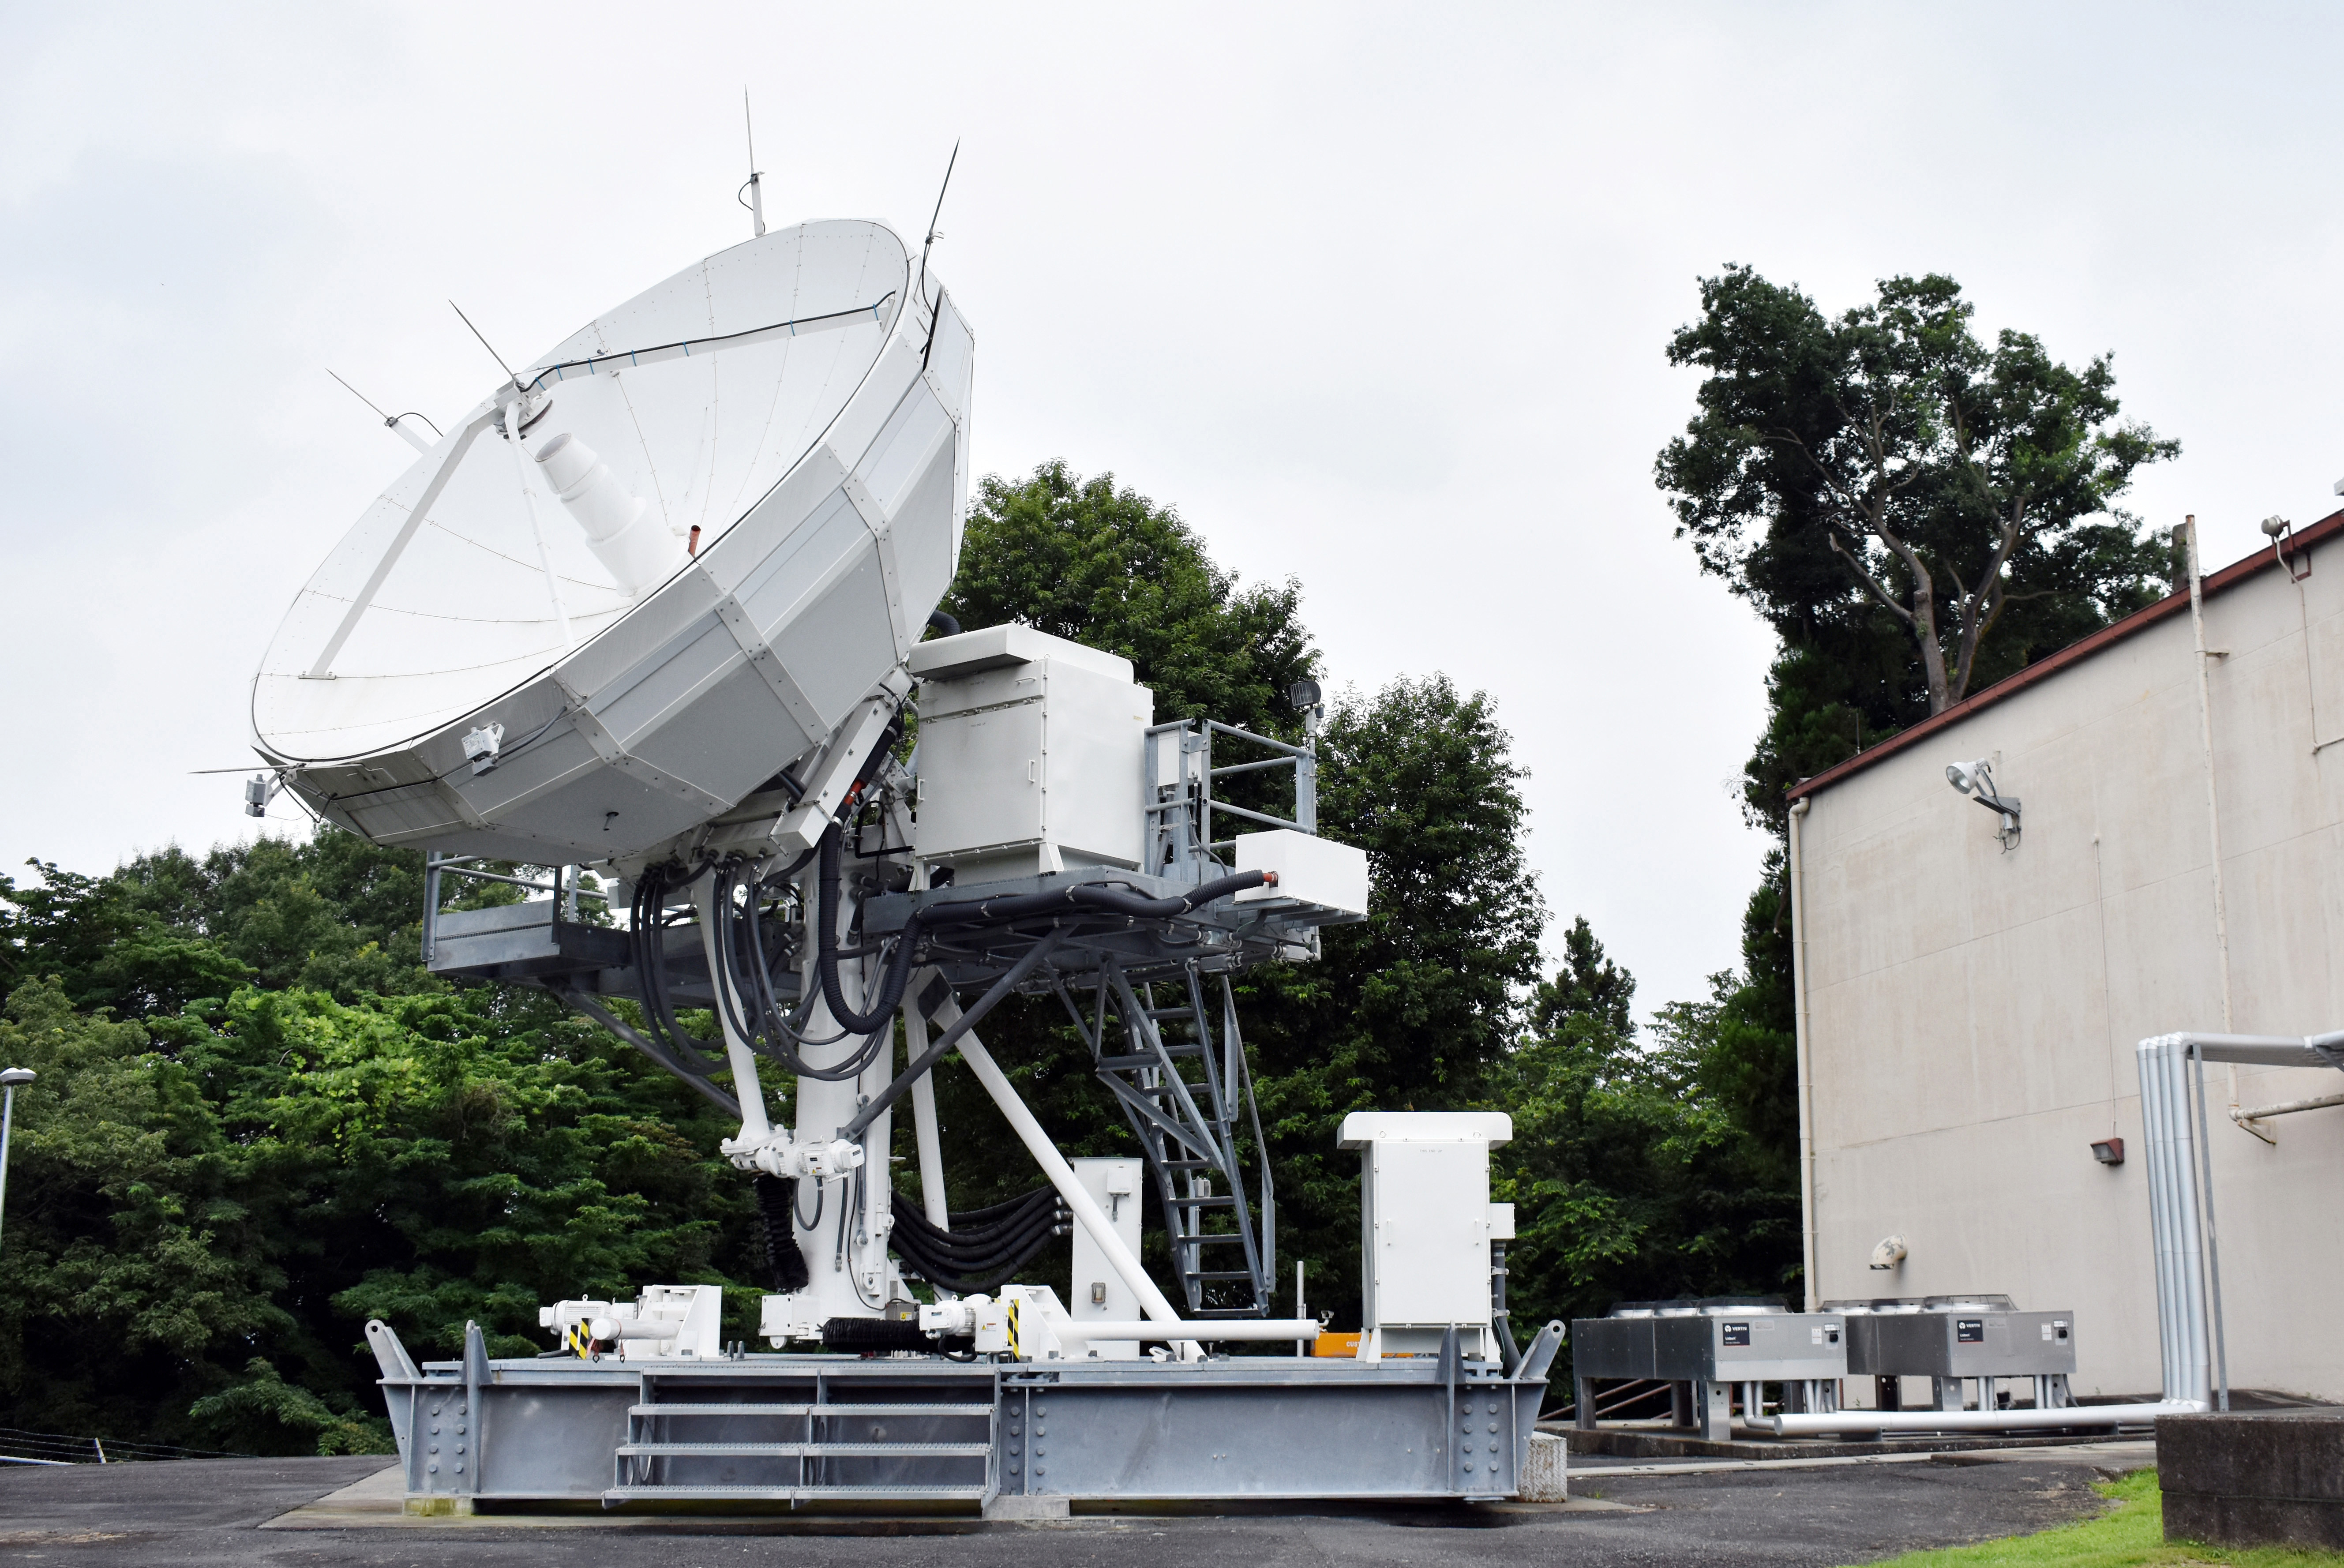 The 374th Communications Squadron's Operating Location C's AN/GSC-52B satellite communications terminal stands outside building 771 at Camp Zama, Japan, July 24, 2020.